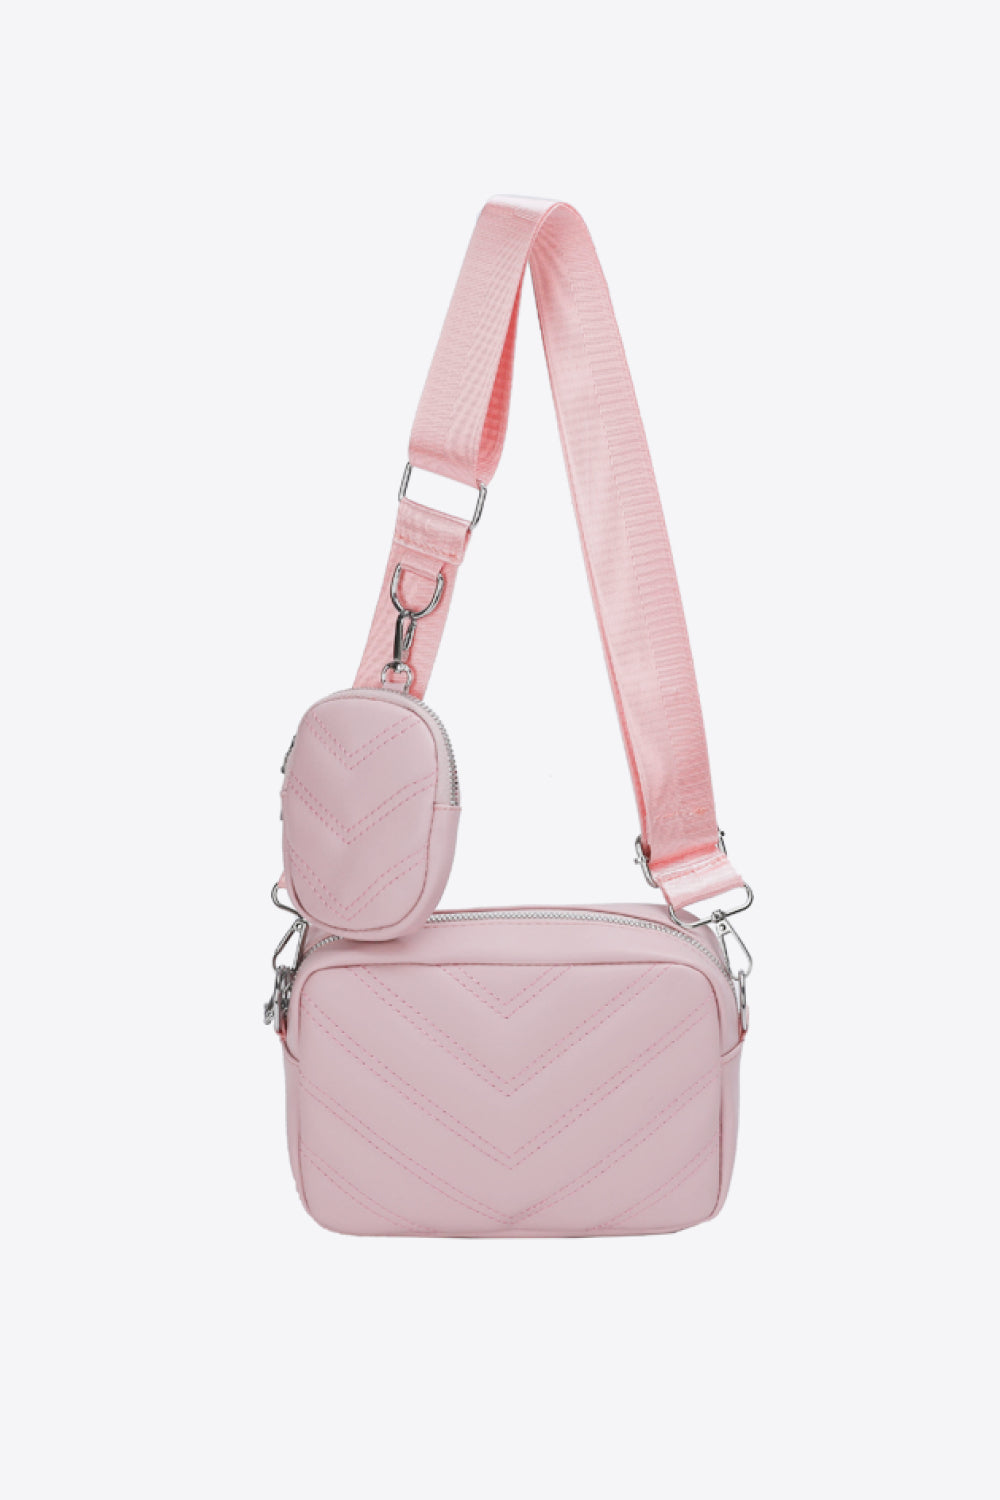 pu leather shoulder bag with small purse, blush pink, white background